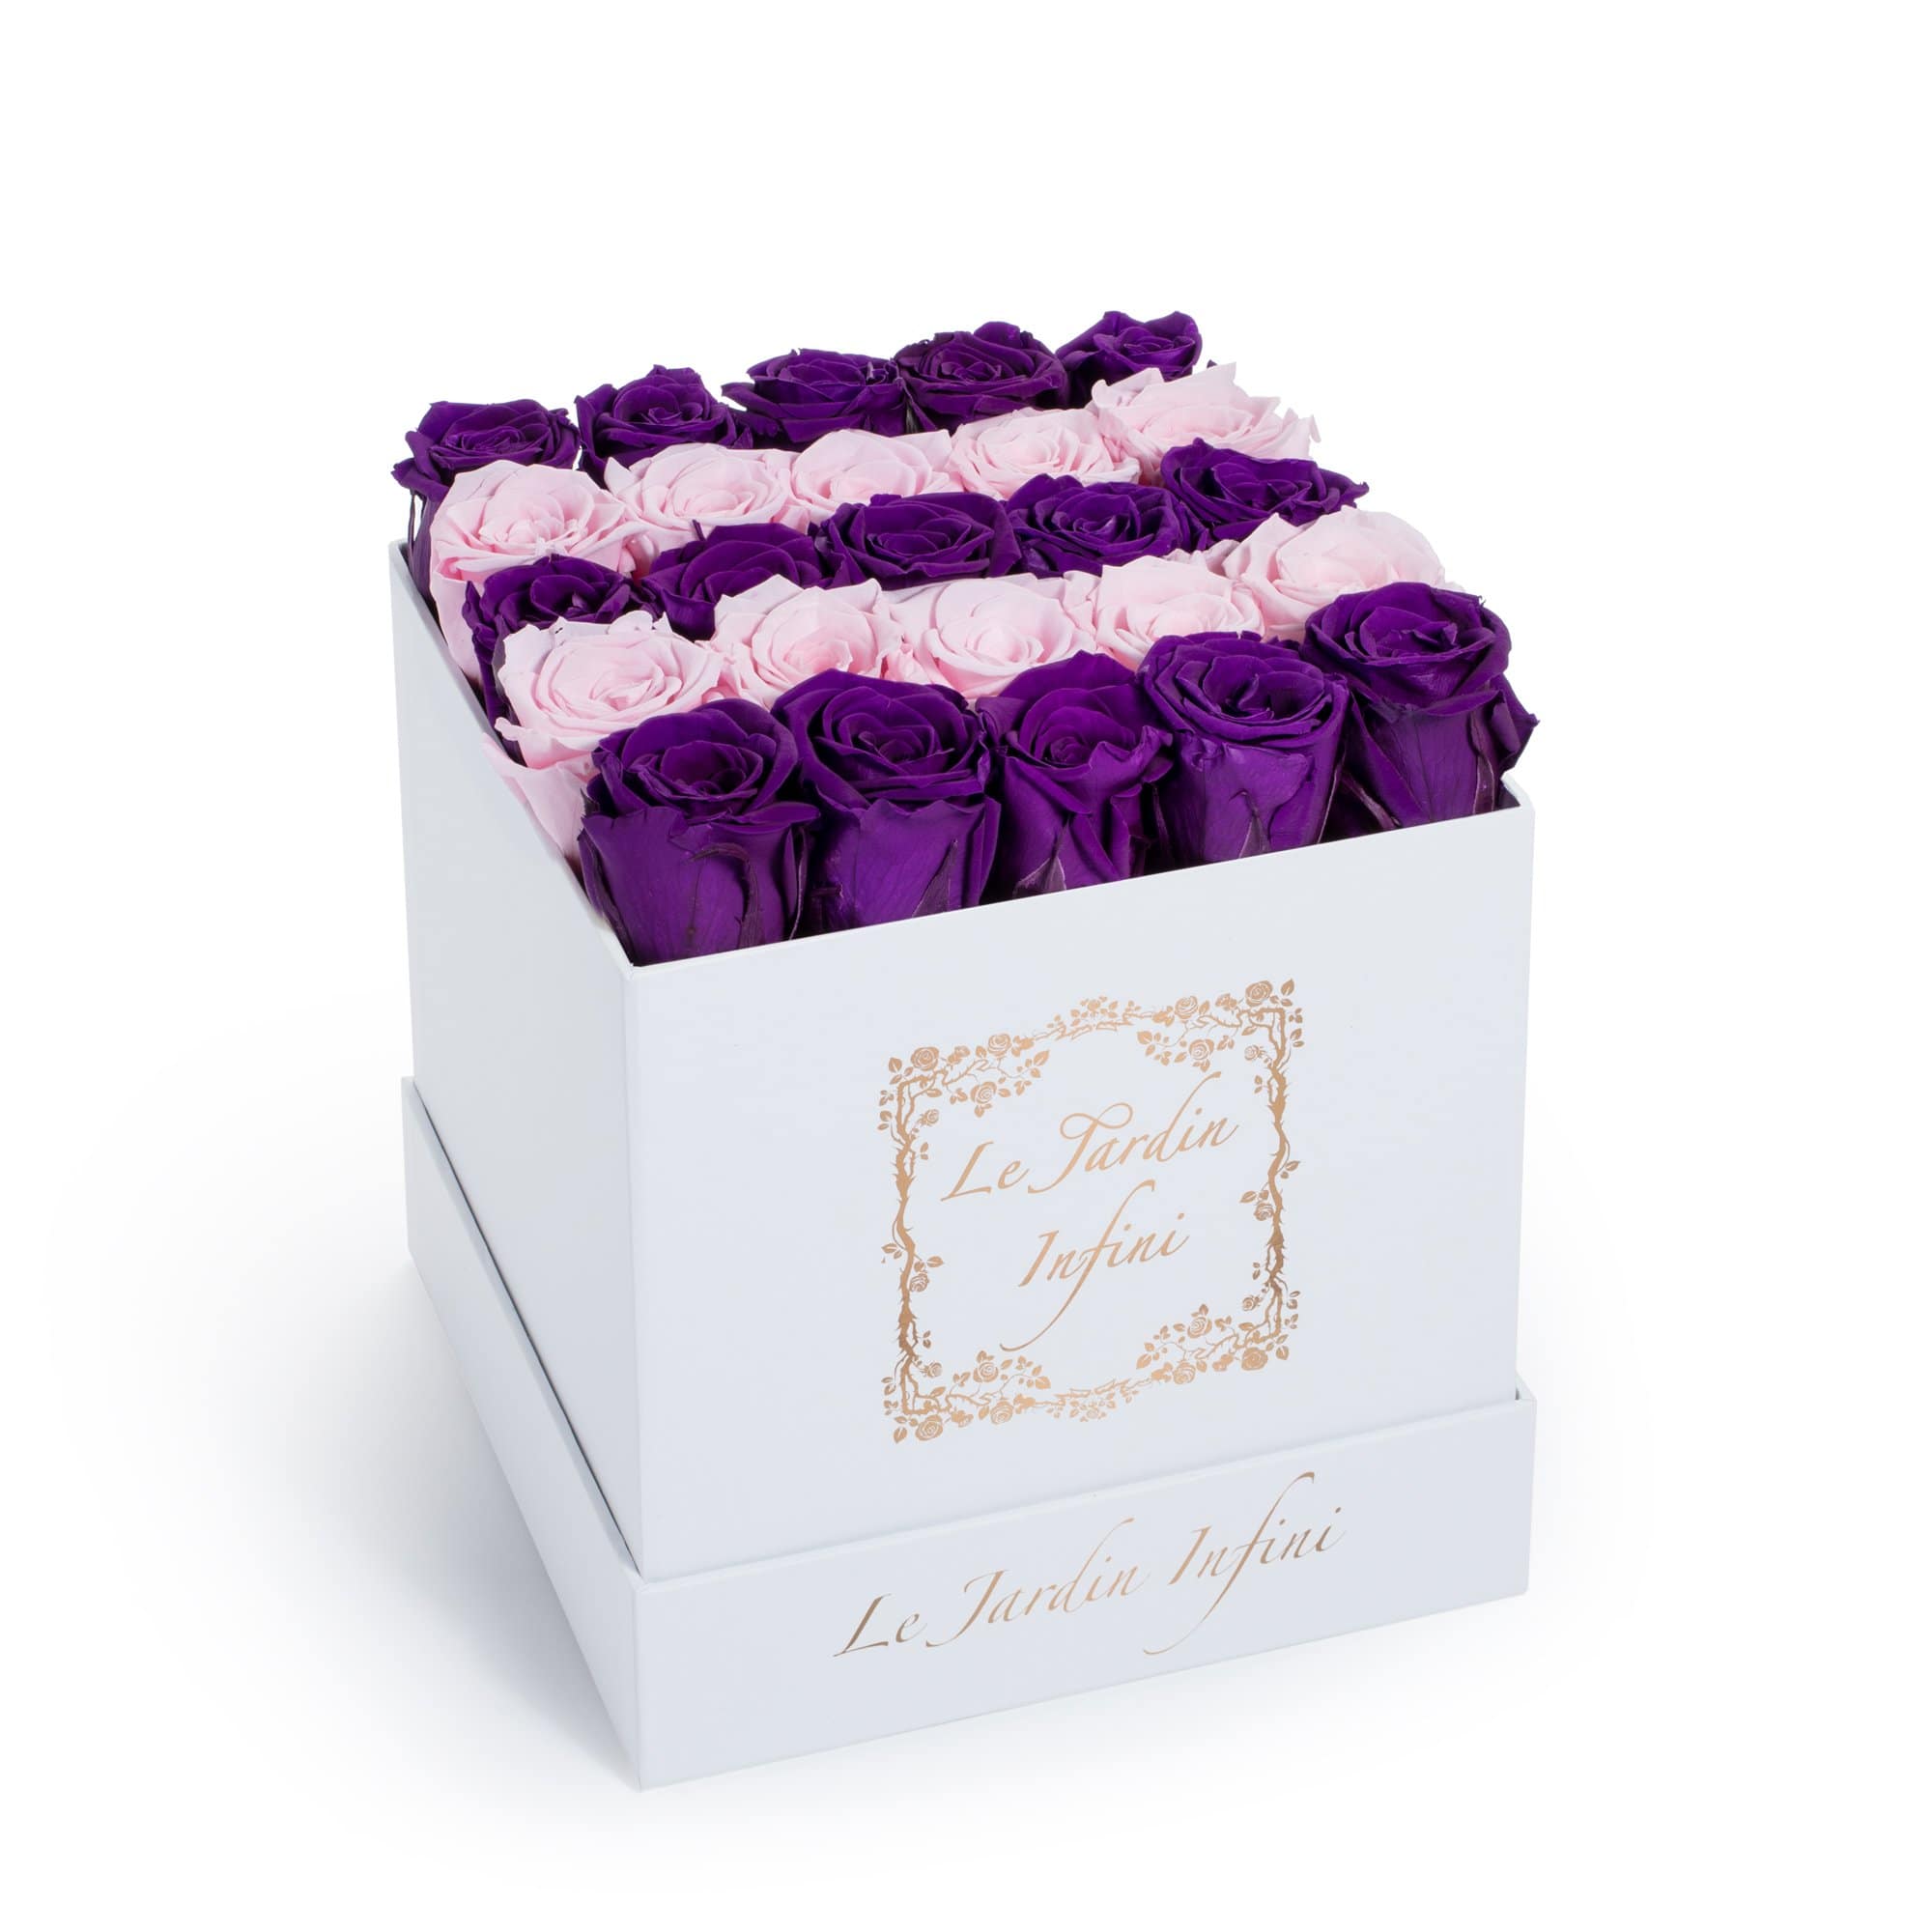 Purple & Soft Pink Rows Preserved Roses - Medium Square White Box - Le Jardin Infini Roses in a Box